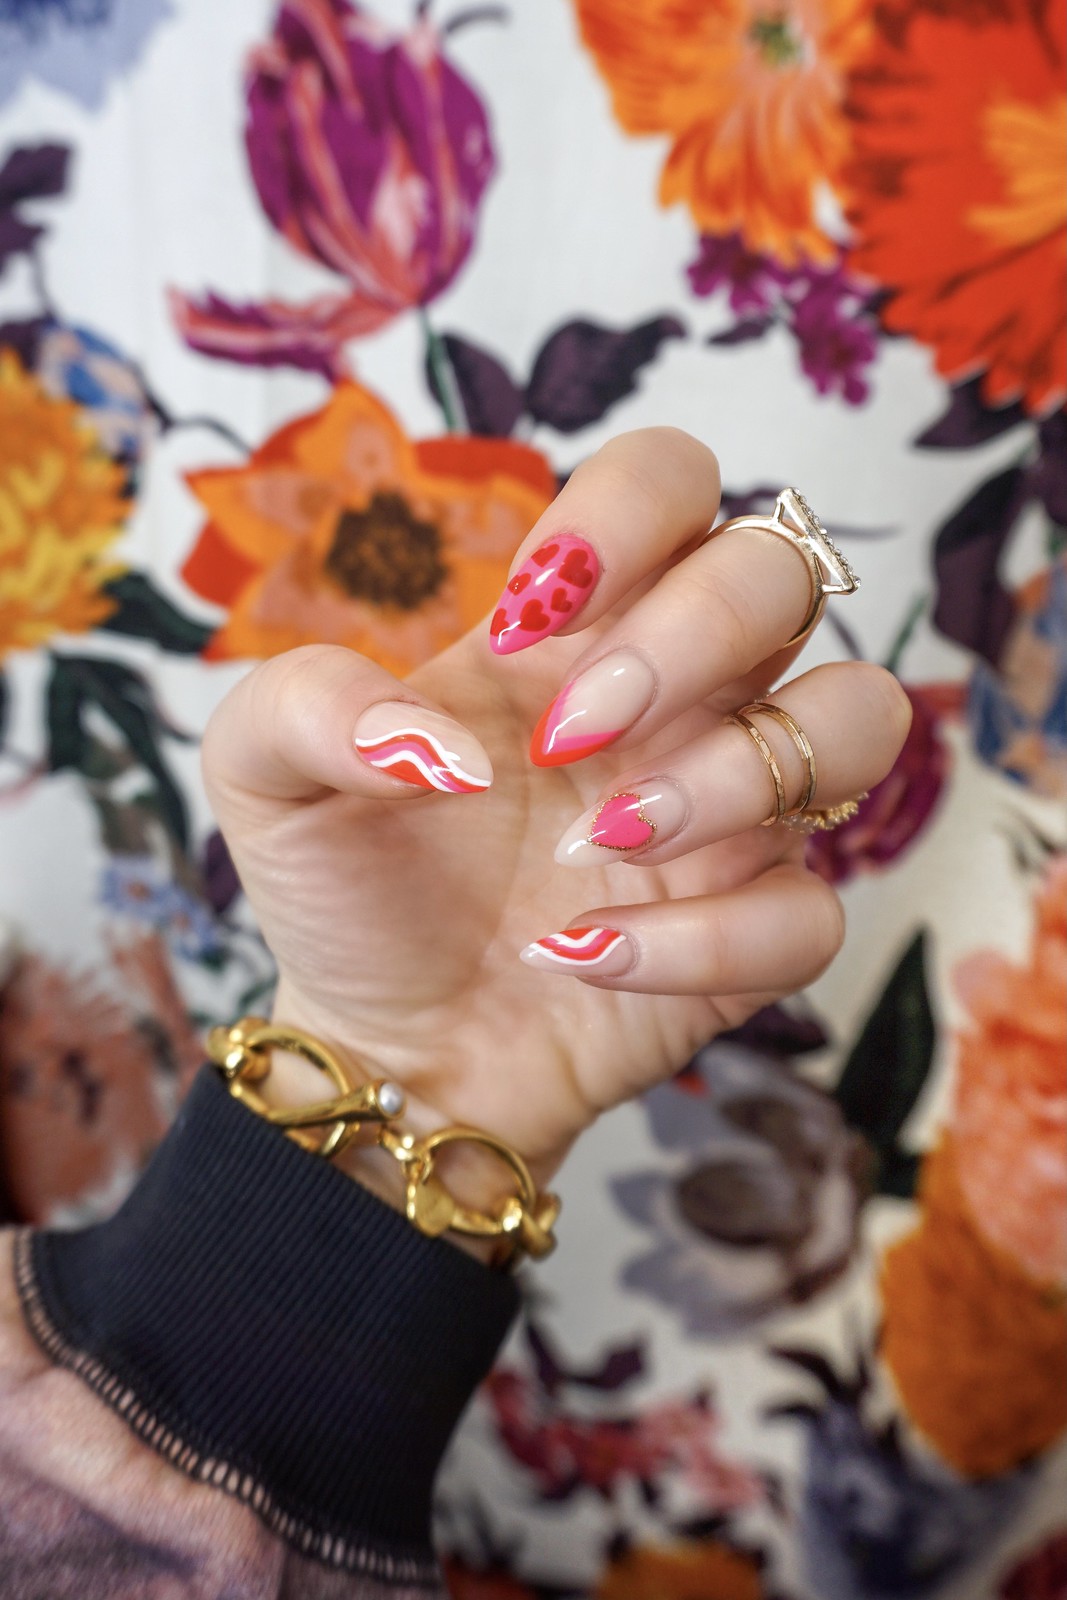 Red & Pink Valentine's Day Nails | Valentines Nails | Heart Nails | Almond Nails | Gel Manicure | Abstract Nail Art | Nail Design Inspiration | February Nails | Negative Space Nails